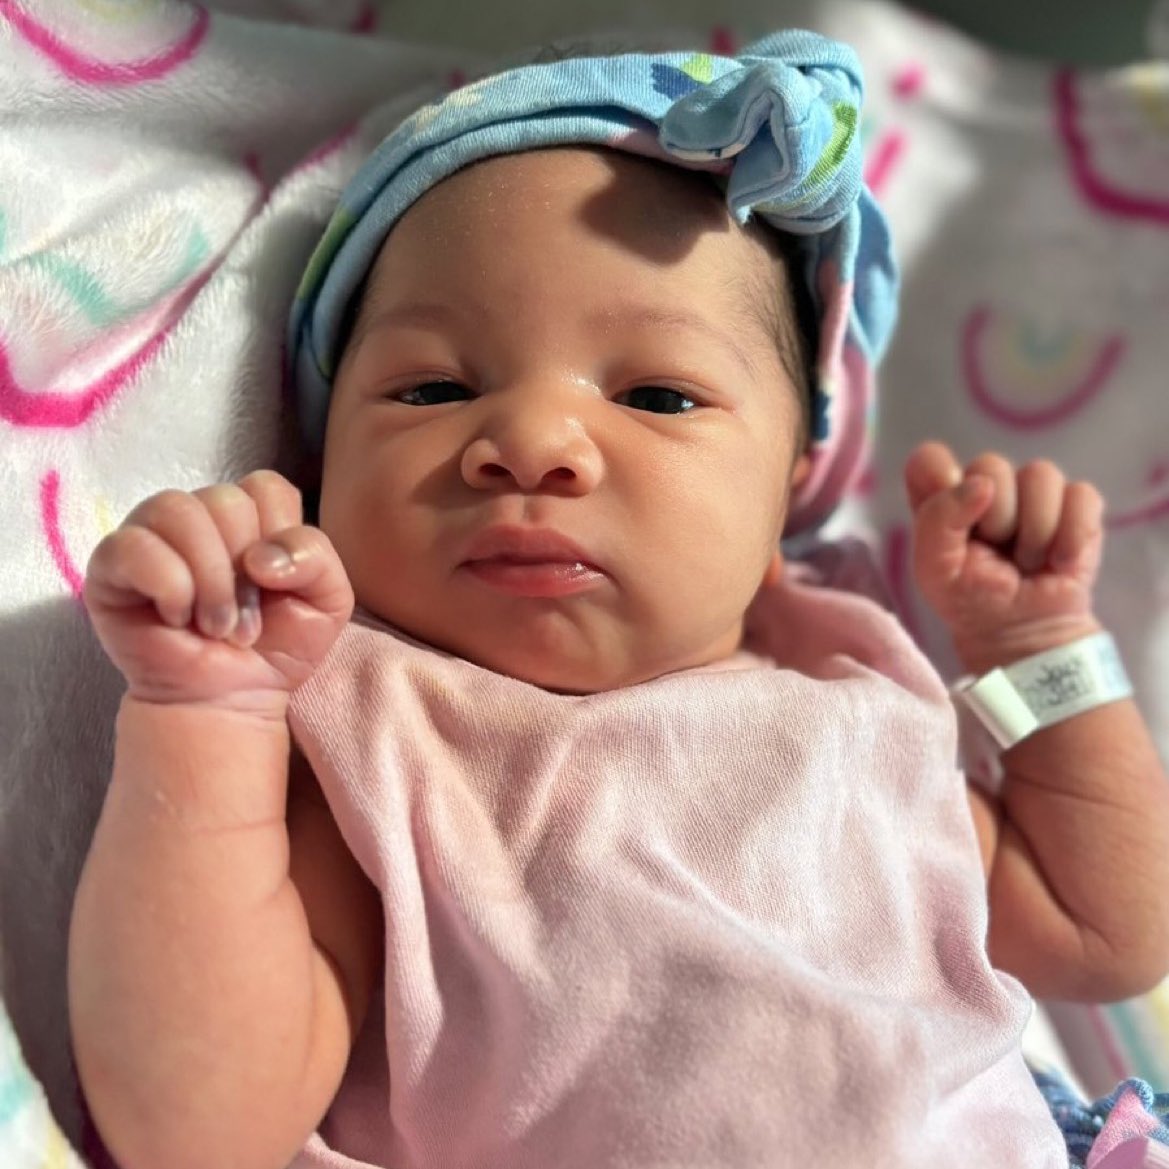 Crip Mac just welcomed his newborn baby girl to the world! 👏